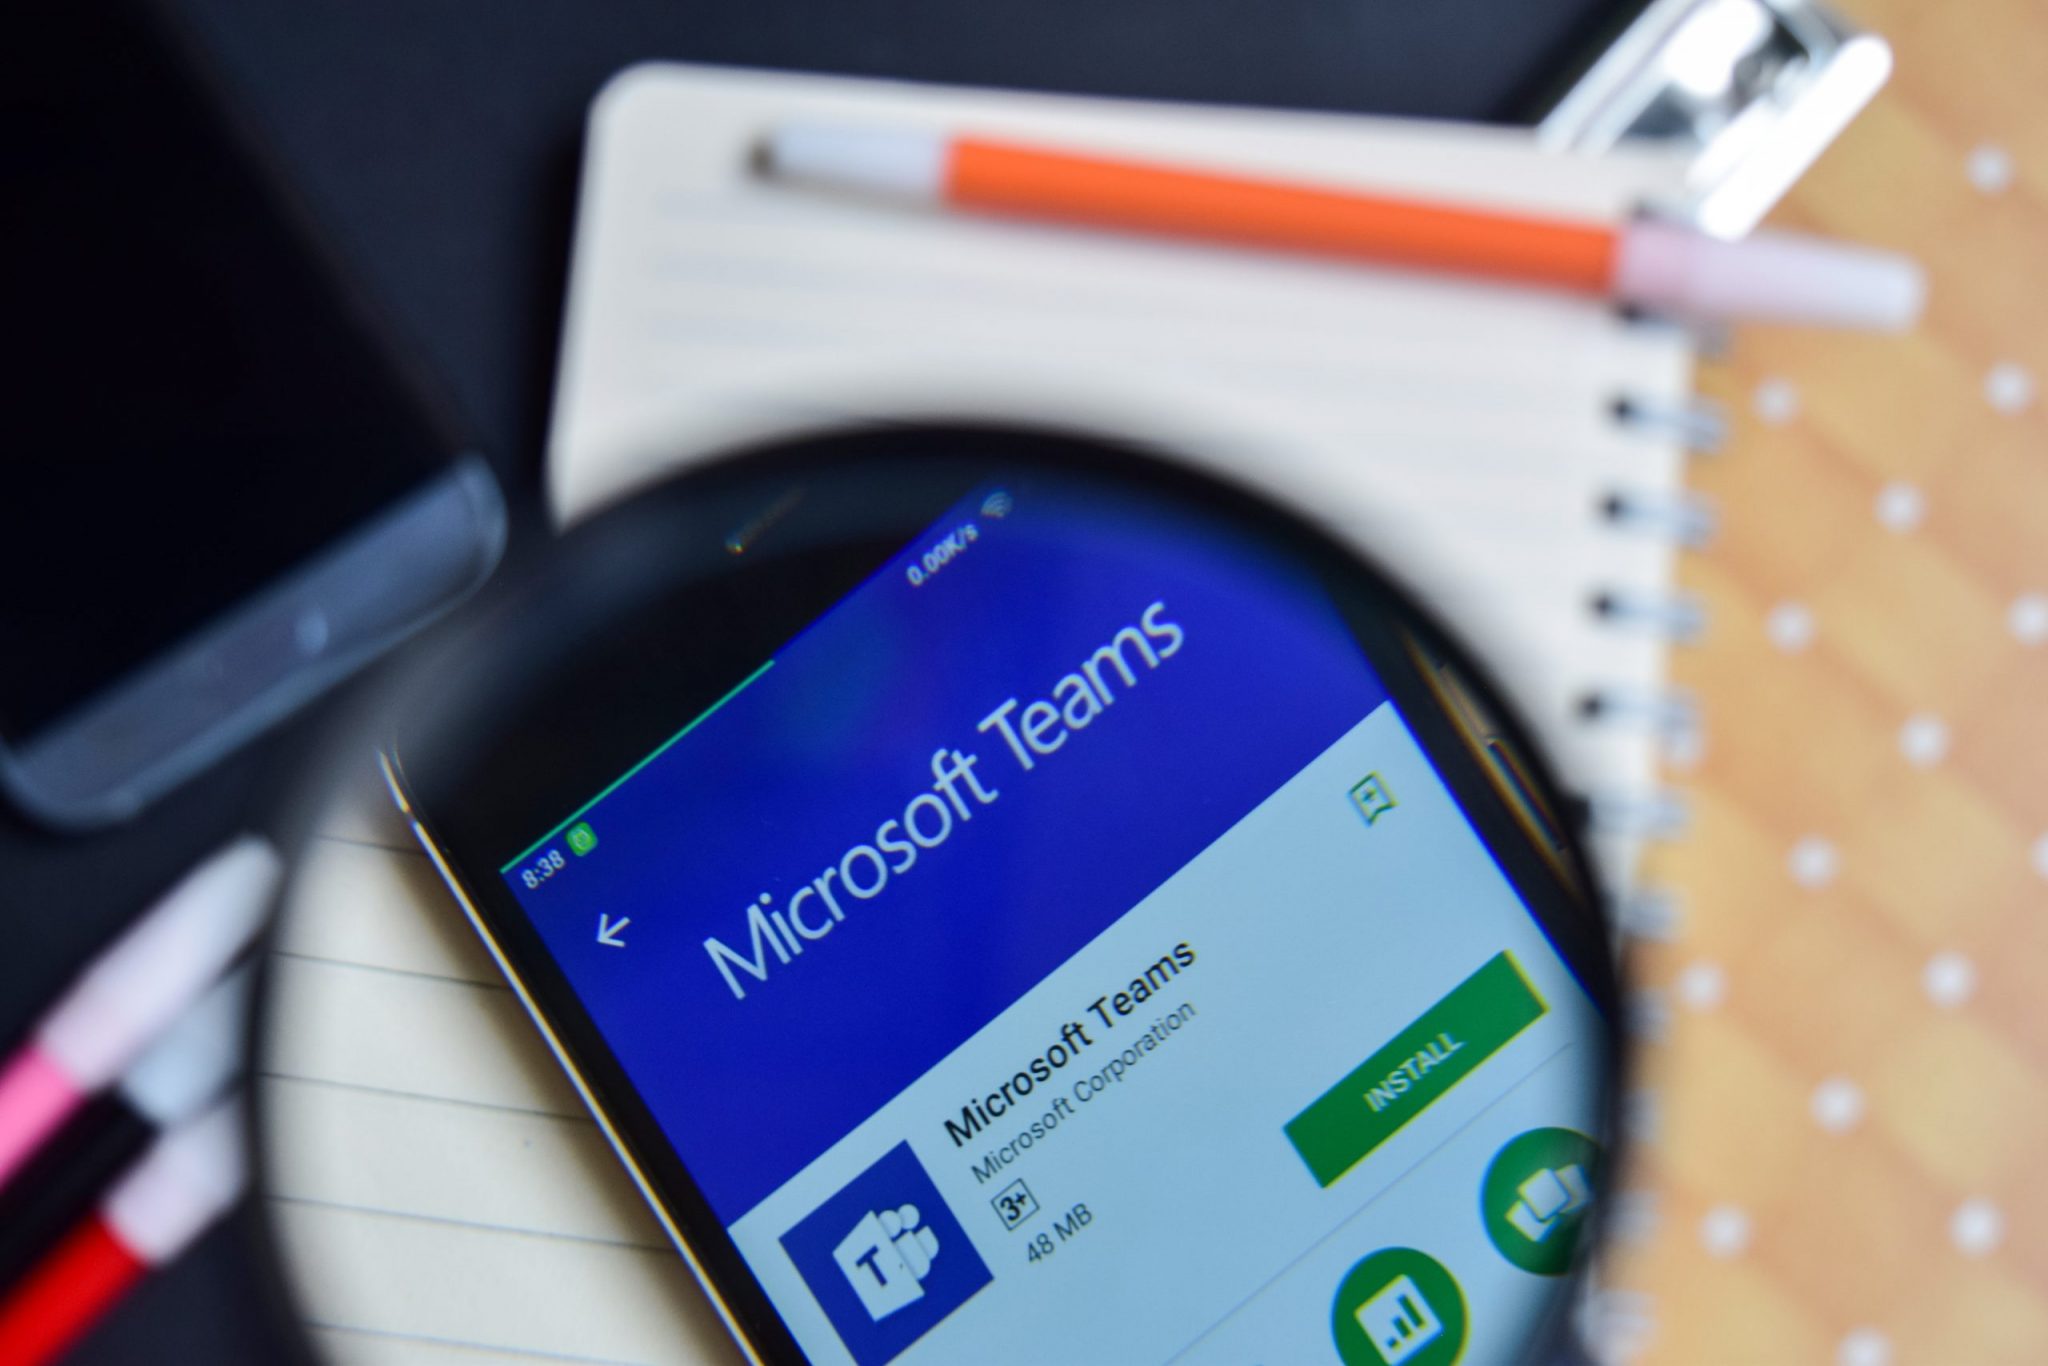 microsoft teams application showing on a smartphone